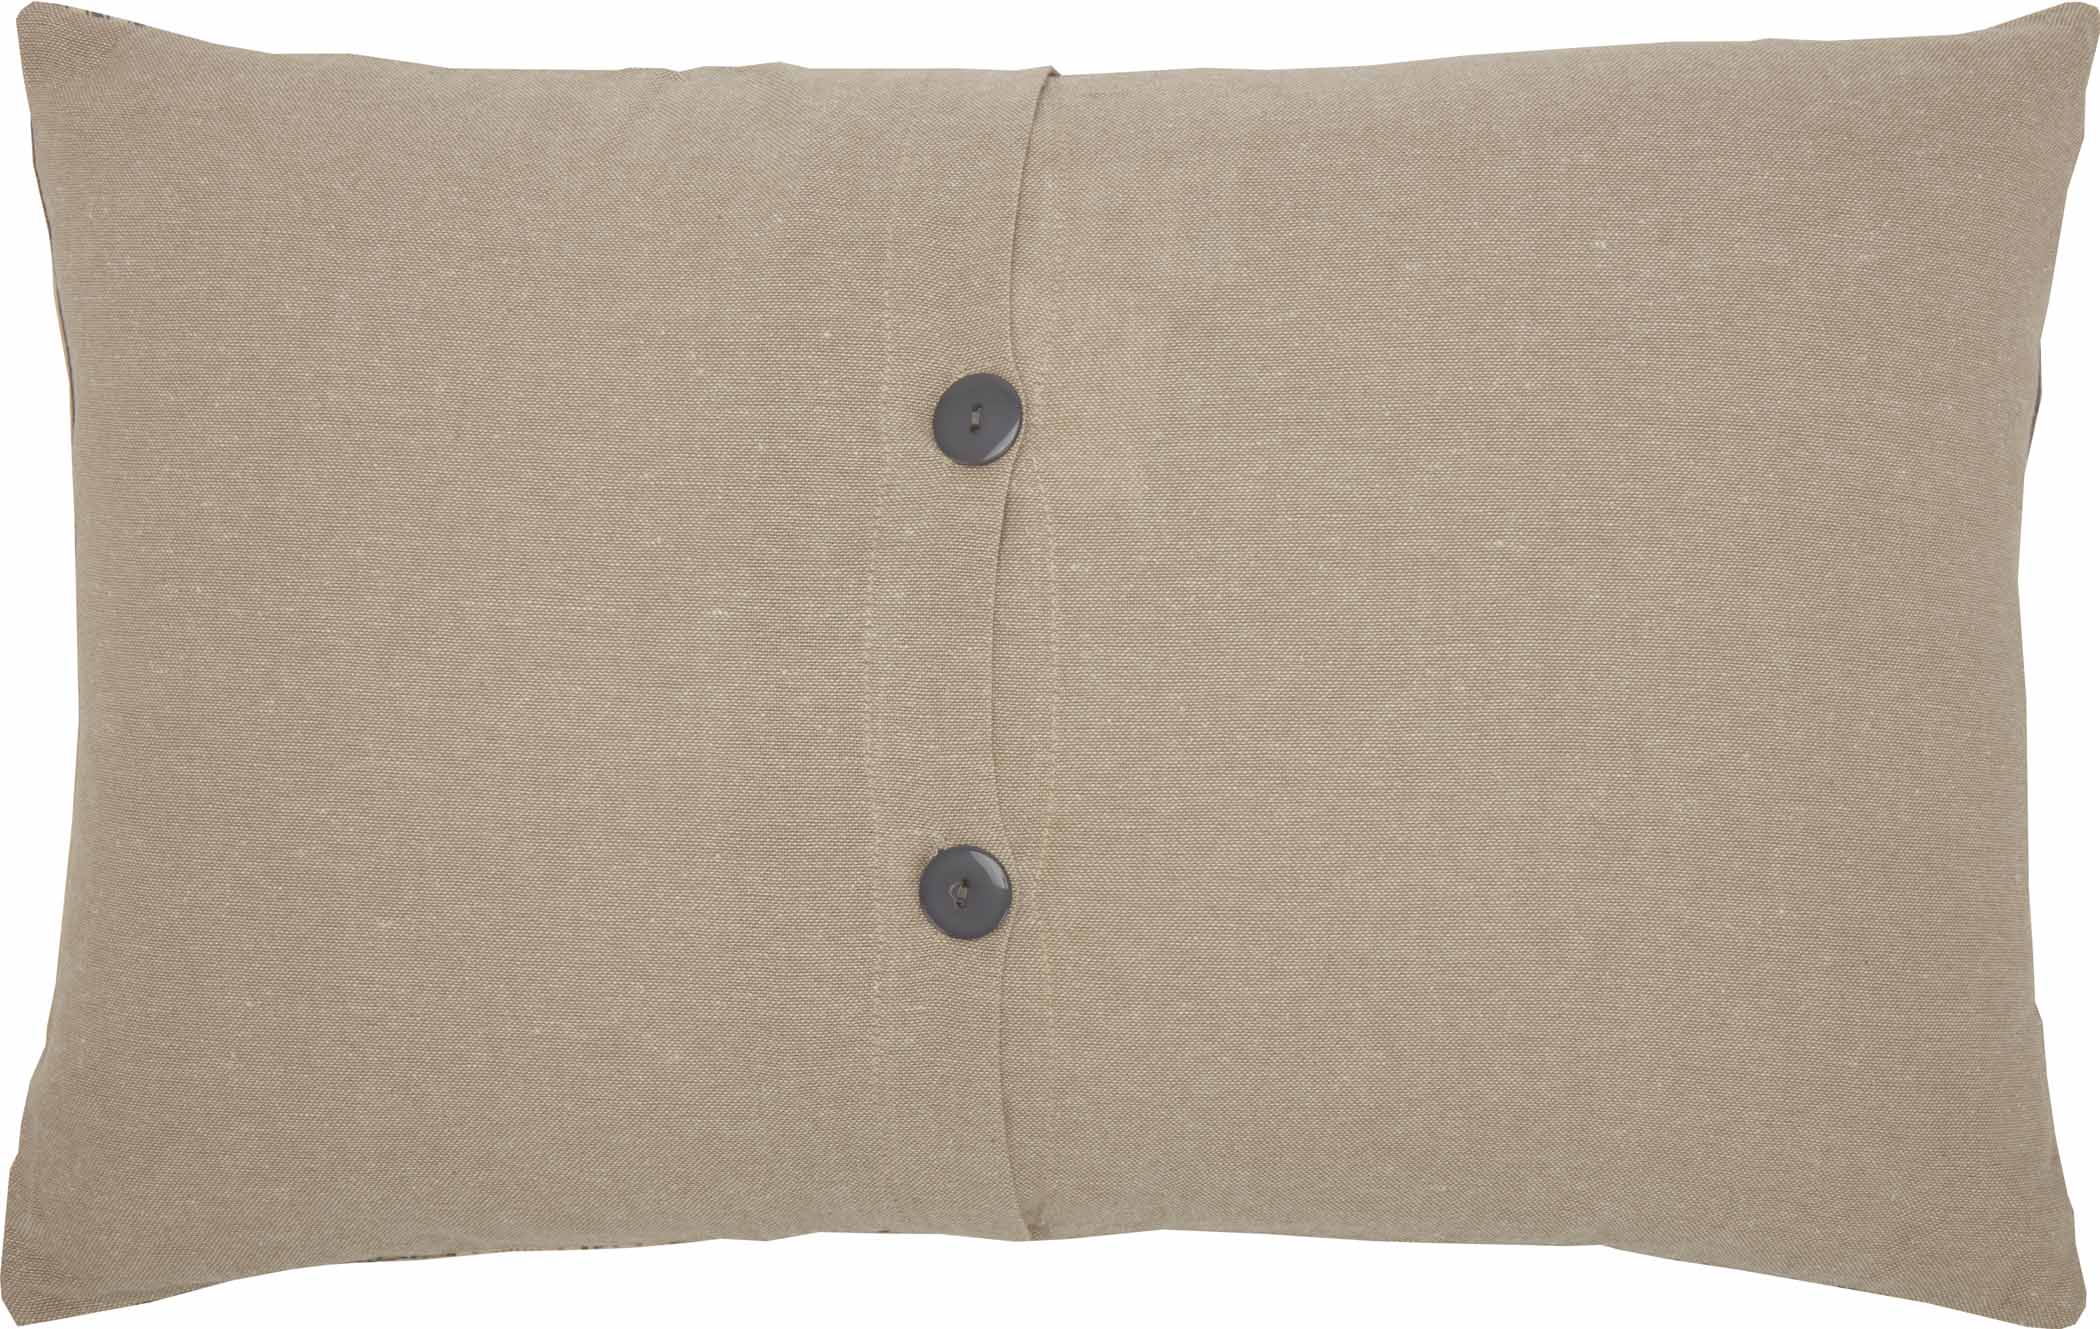 Sawyer Mill Charcoal Plow Pillow 14x22 - Clearance - All Sales final